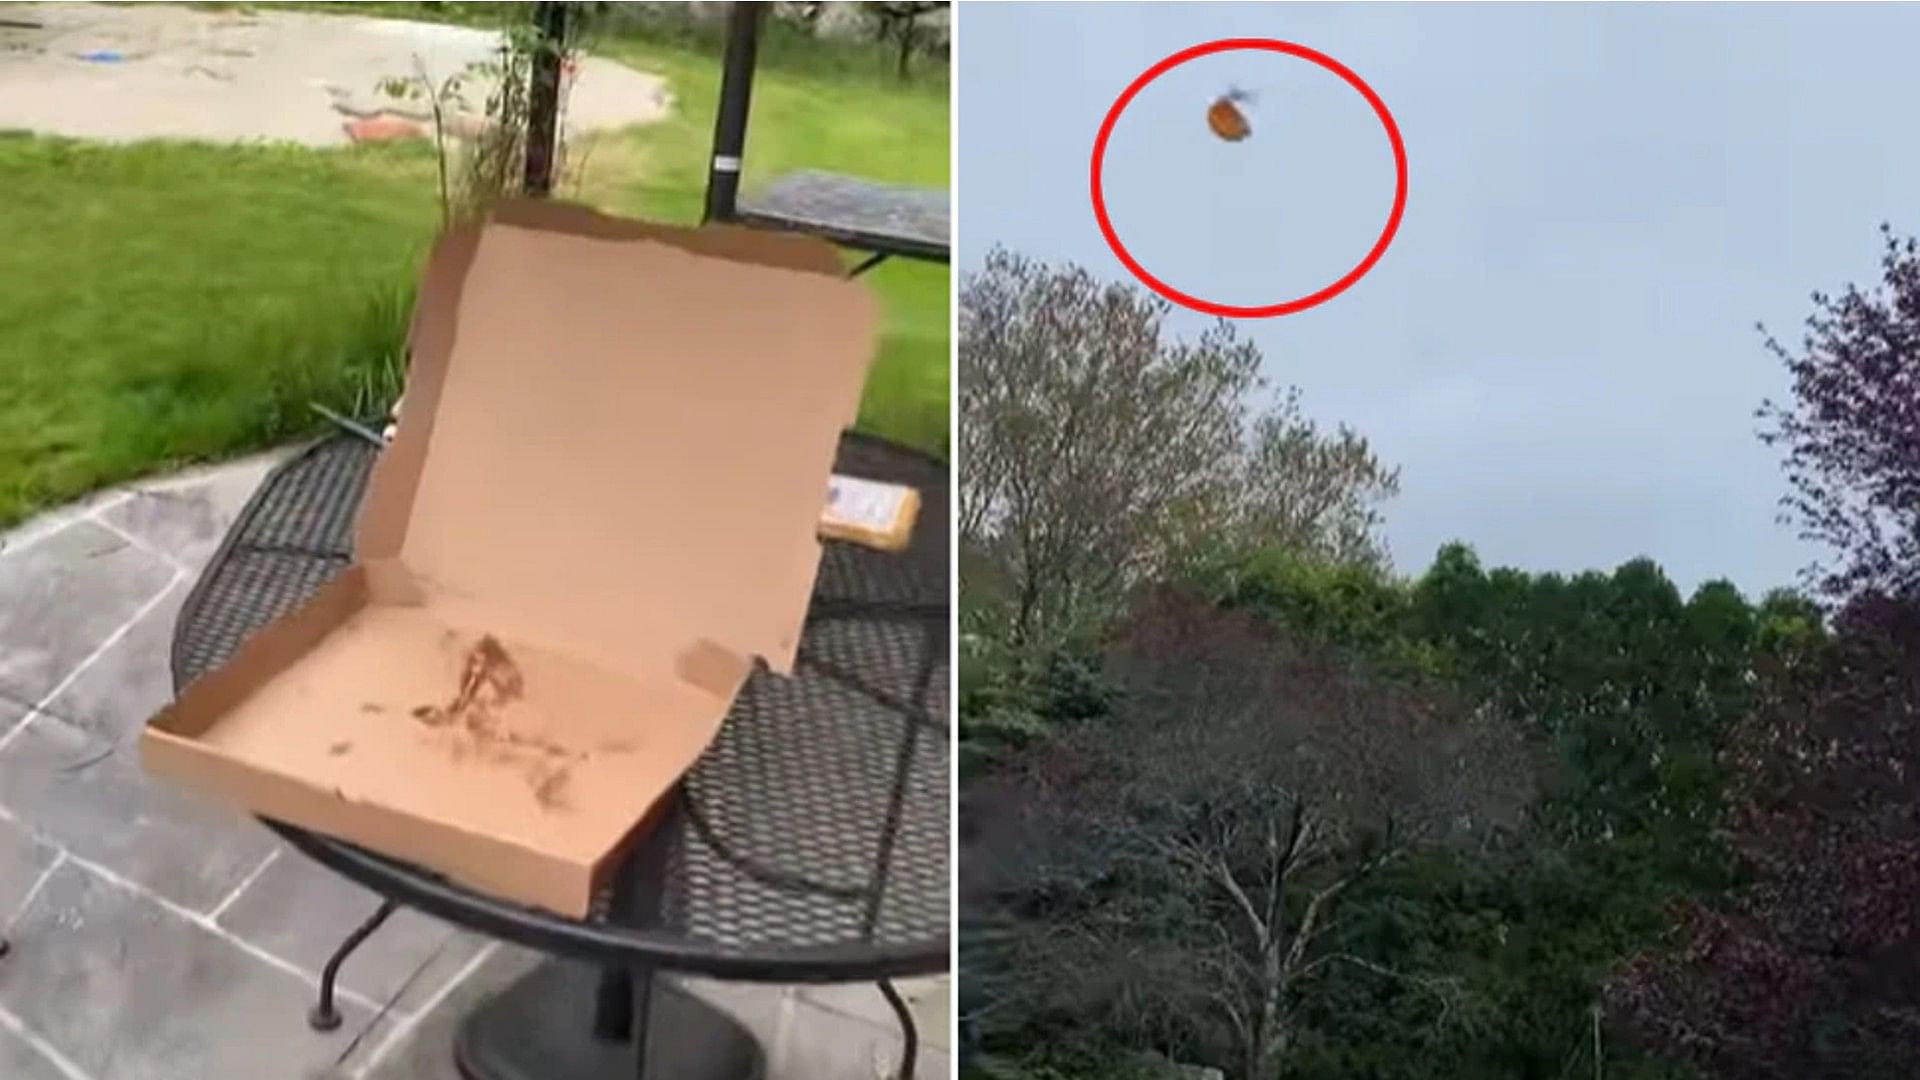 When the bird flew away with the whole pizza seagull video is going viral on internet